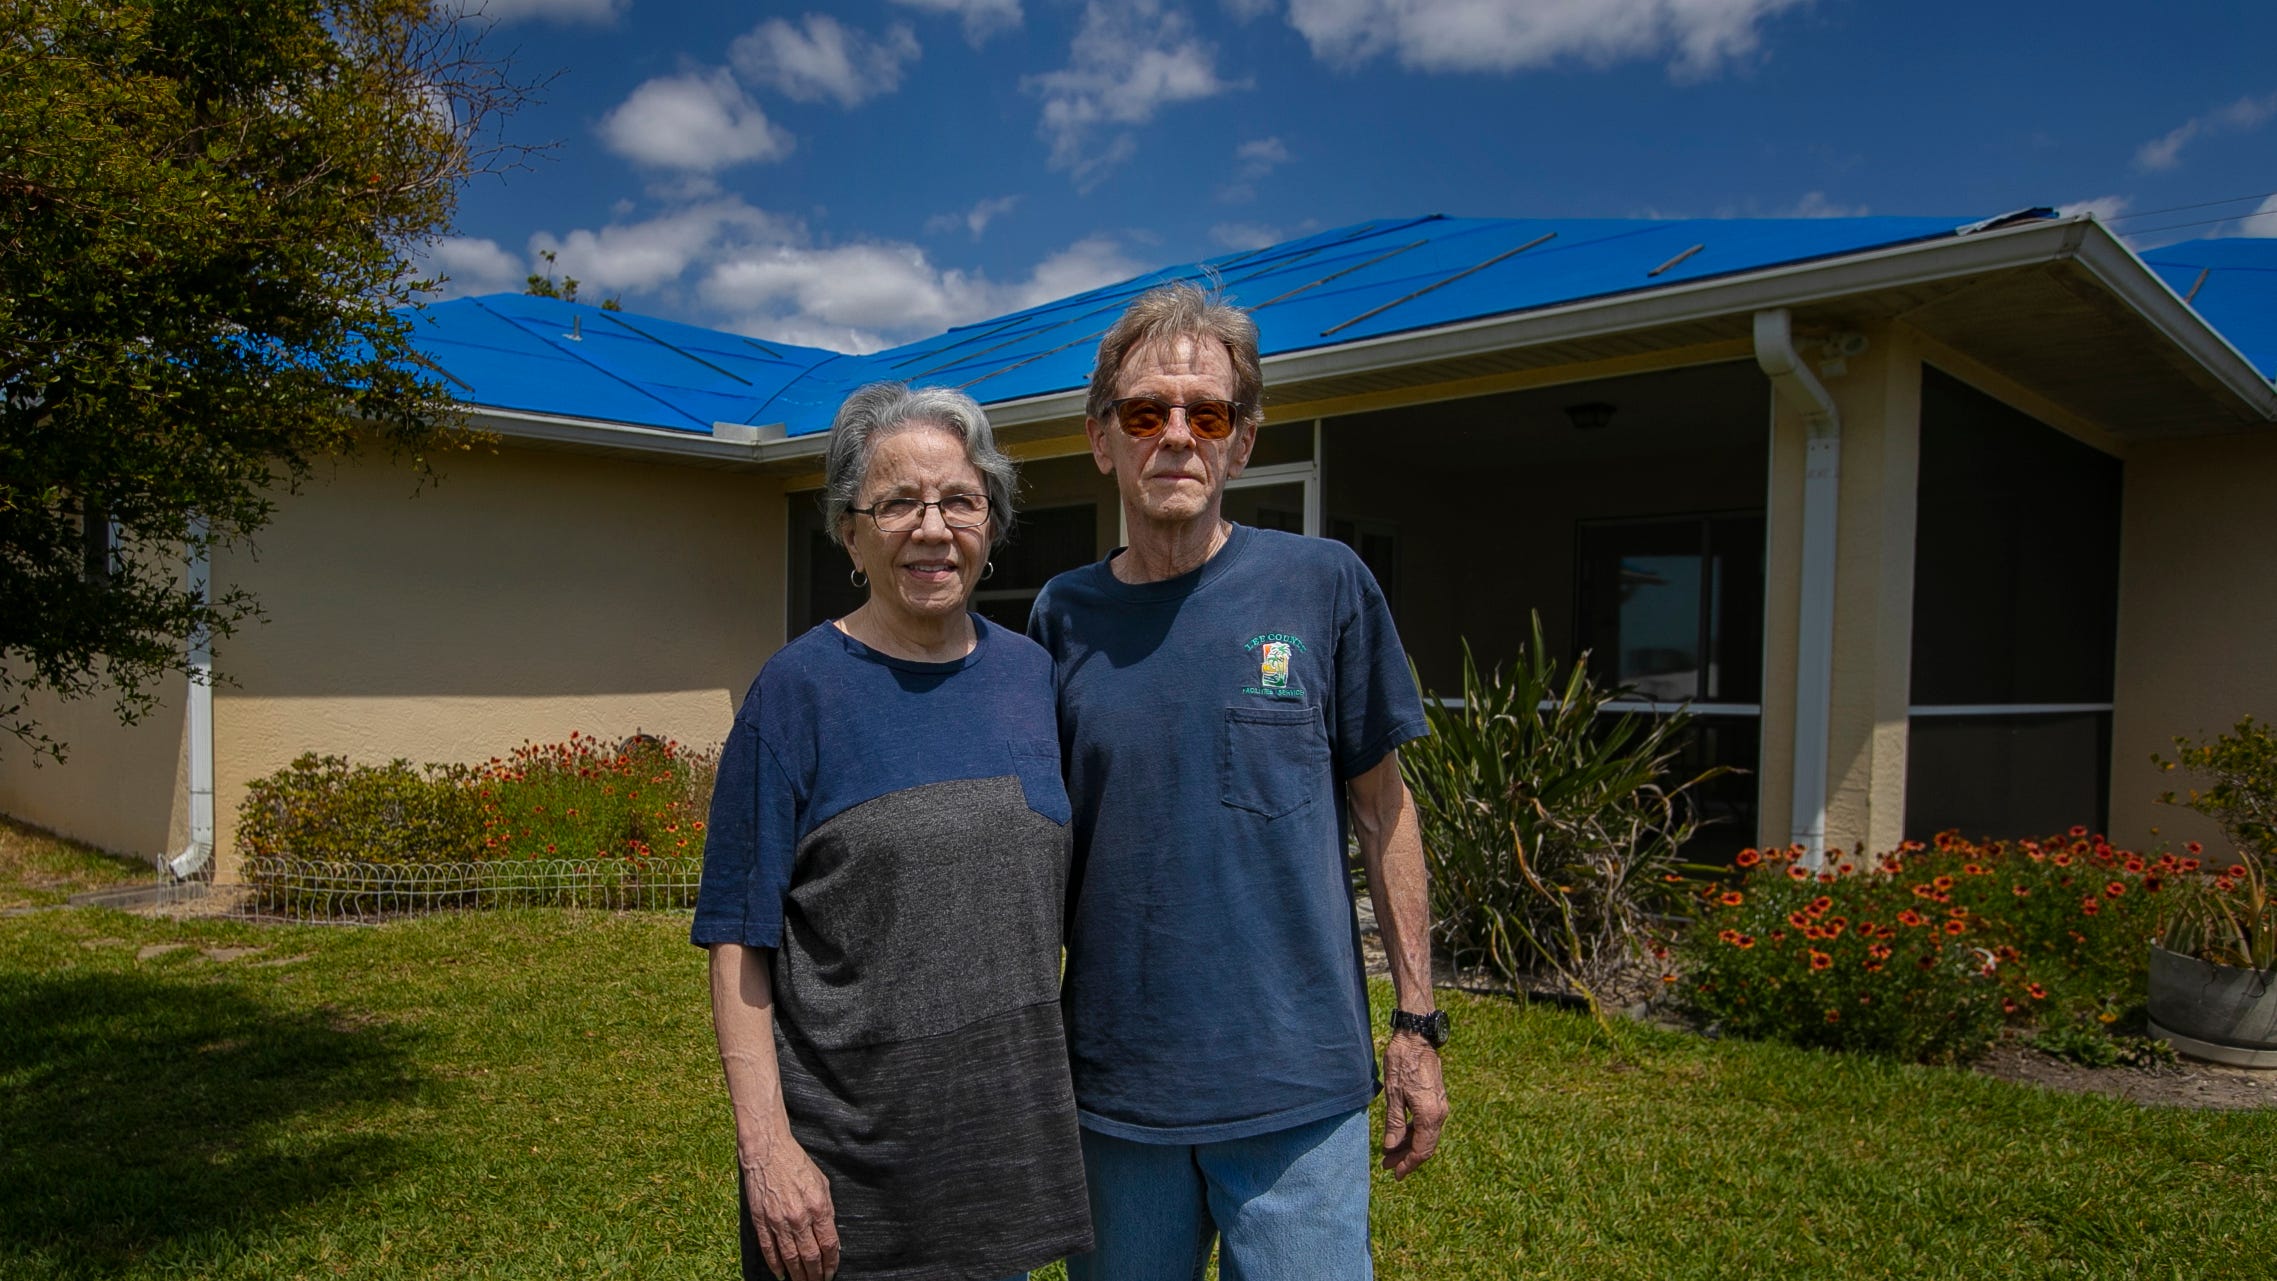 Cape Coral residents, Michael Michael and Karin Evans, shown here next to their home on March 22, 2023, are still waiting on insurance approval for roof damage repairs caused by Hurricane Ian last year.